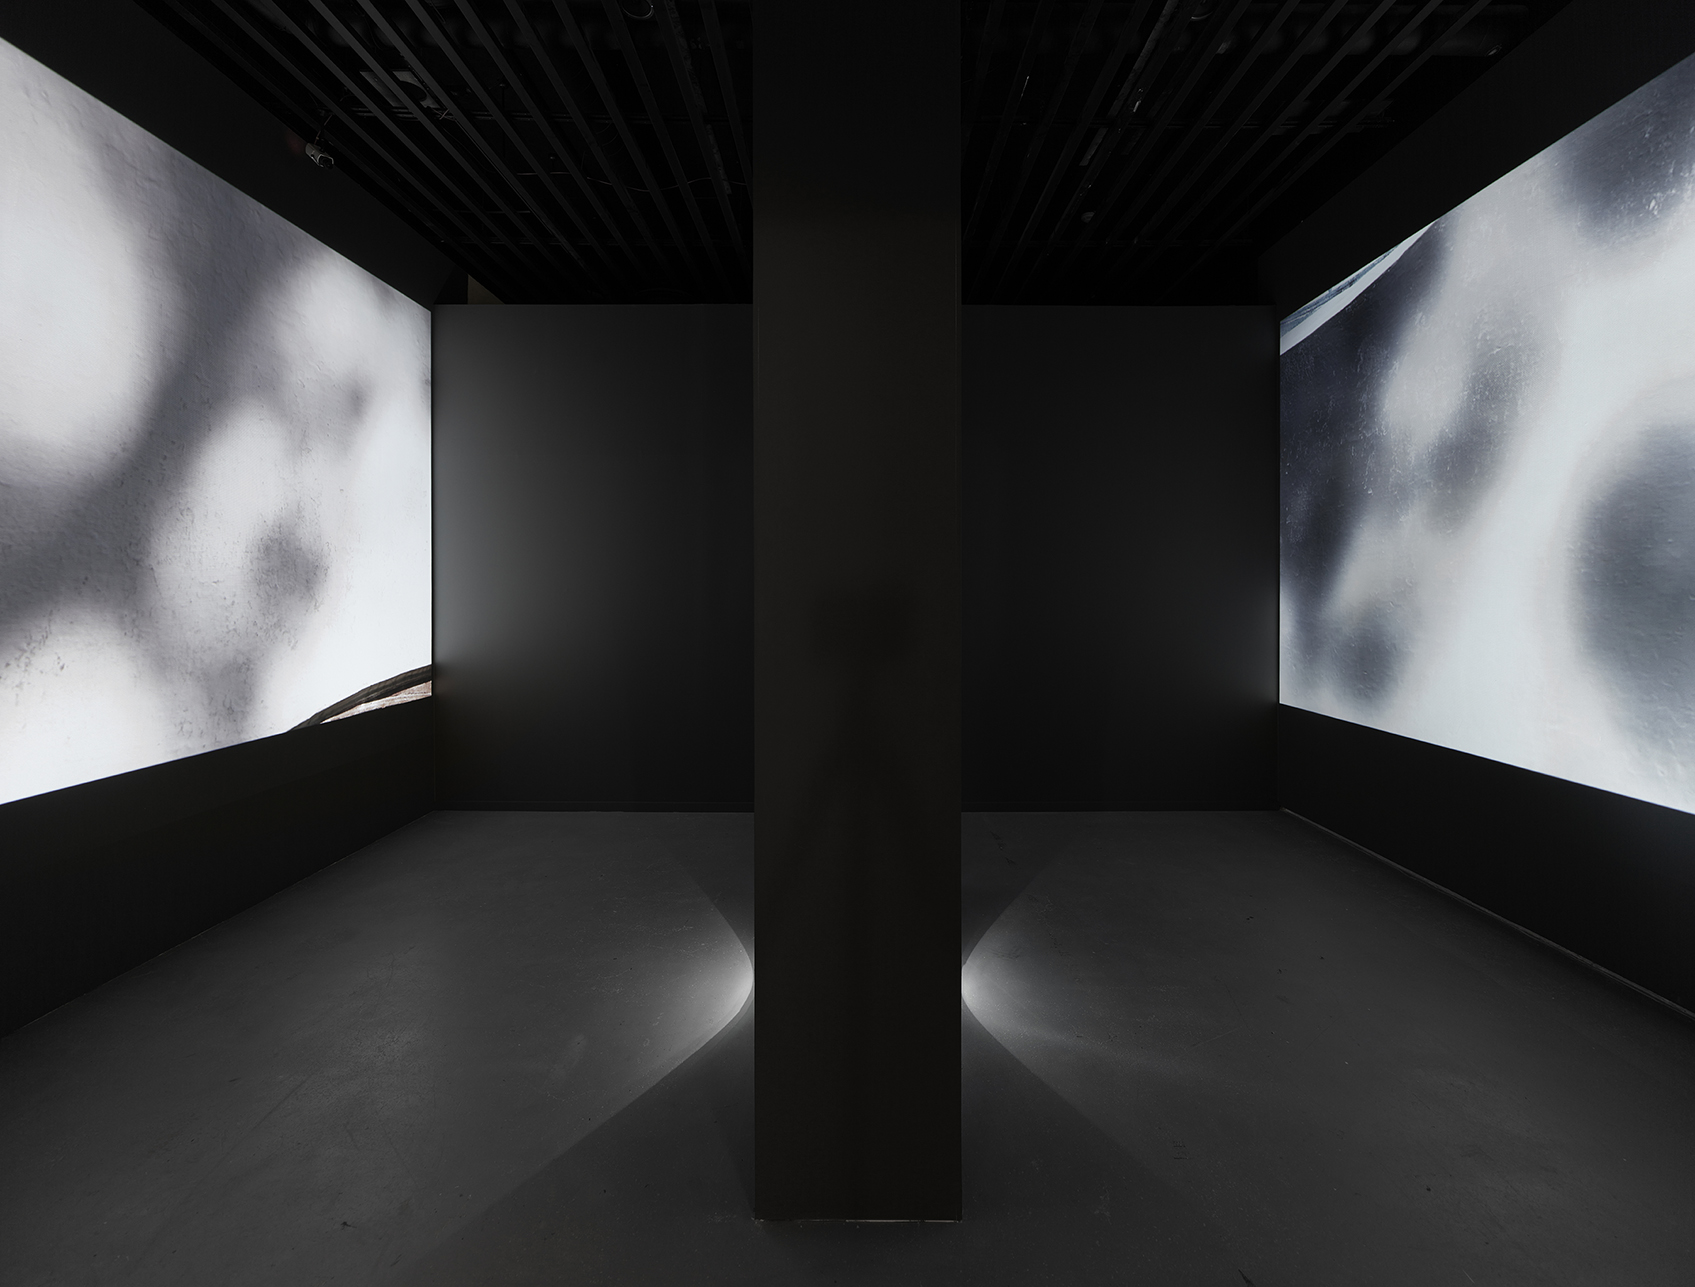 Installation view from the duo exhibition with Per Bak Jensen TWO ROOMS, 2023, The National Museum of Photography, Copenhagen (DK) Photo: Anders Sune Berg